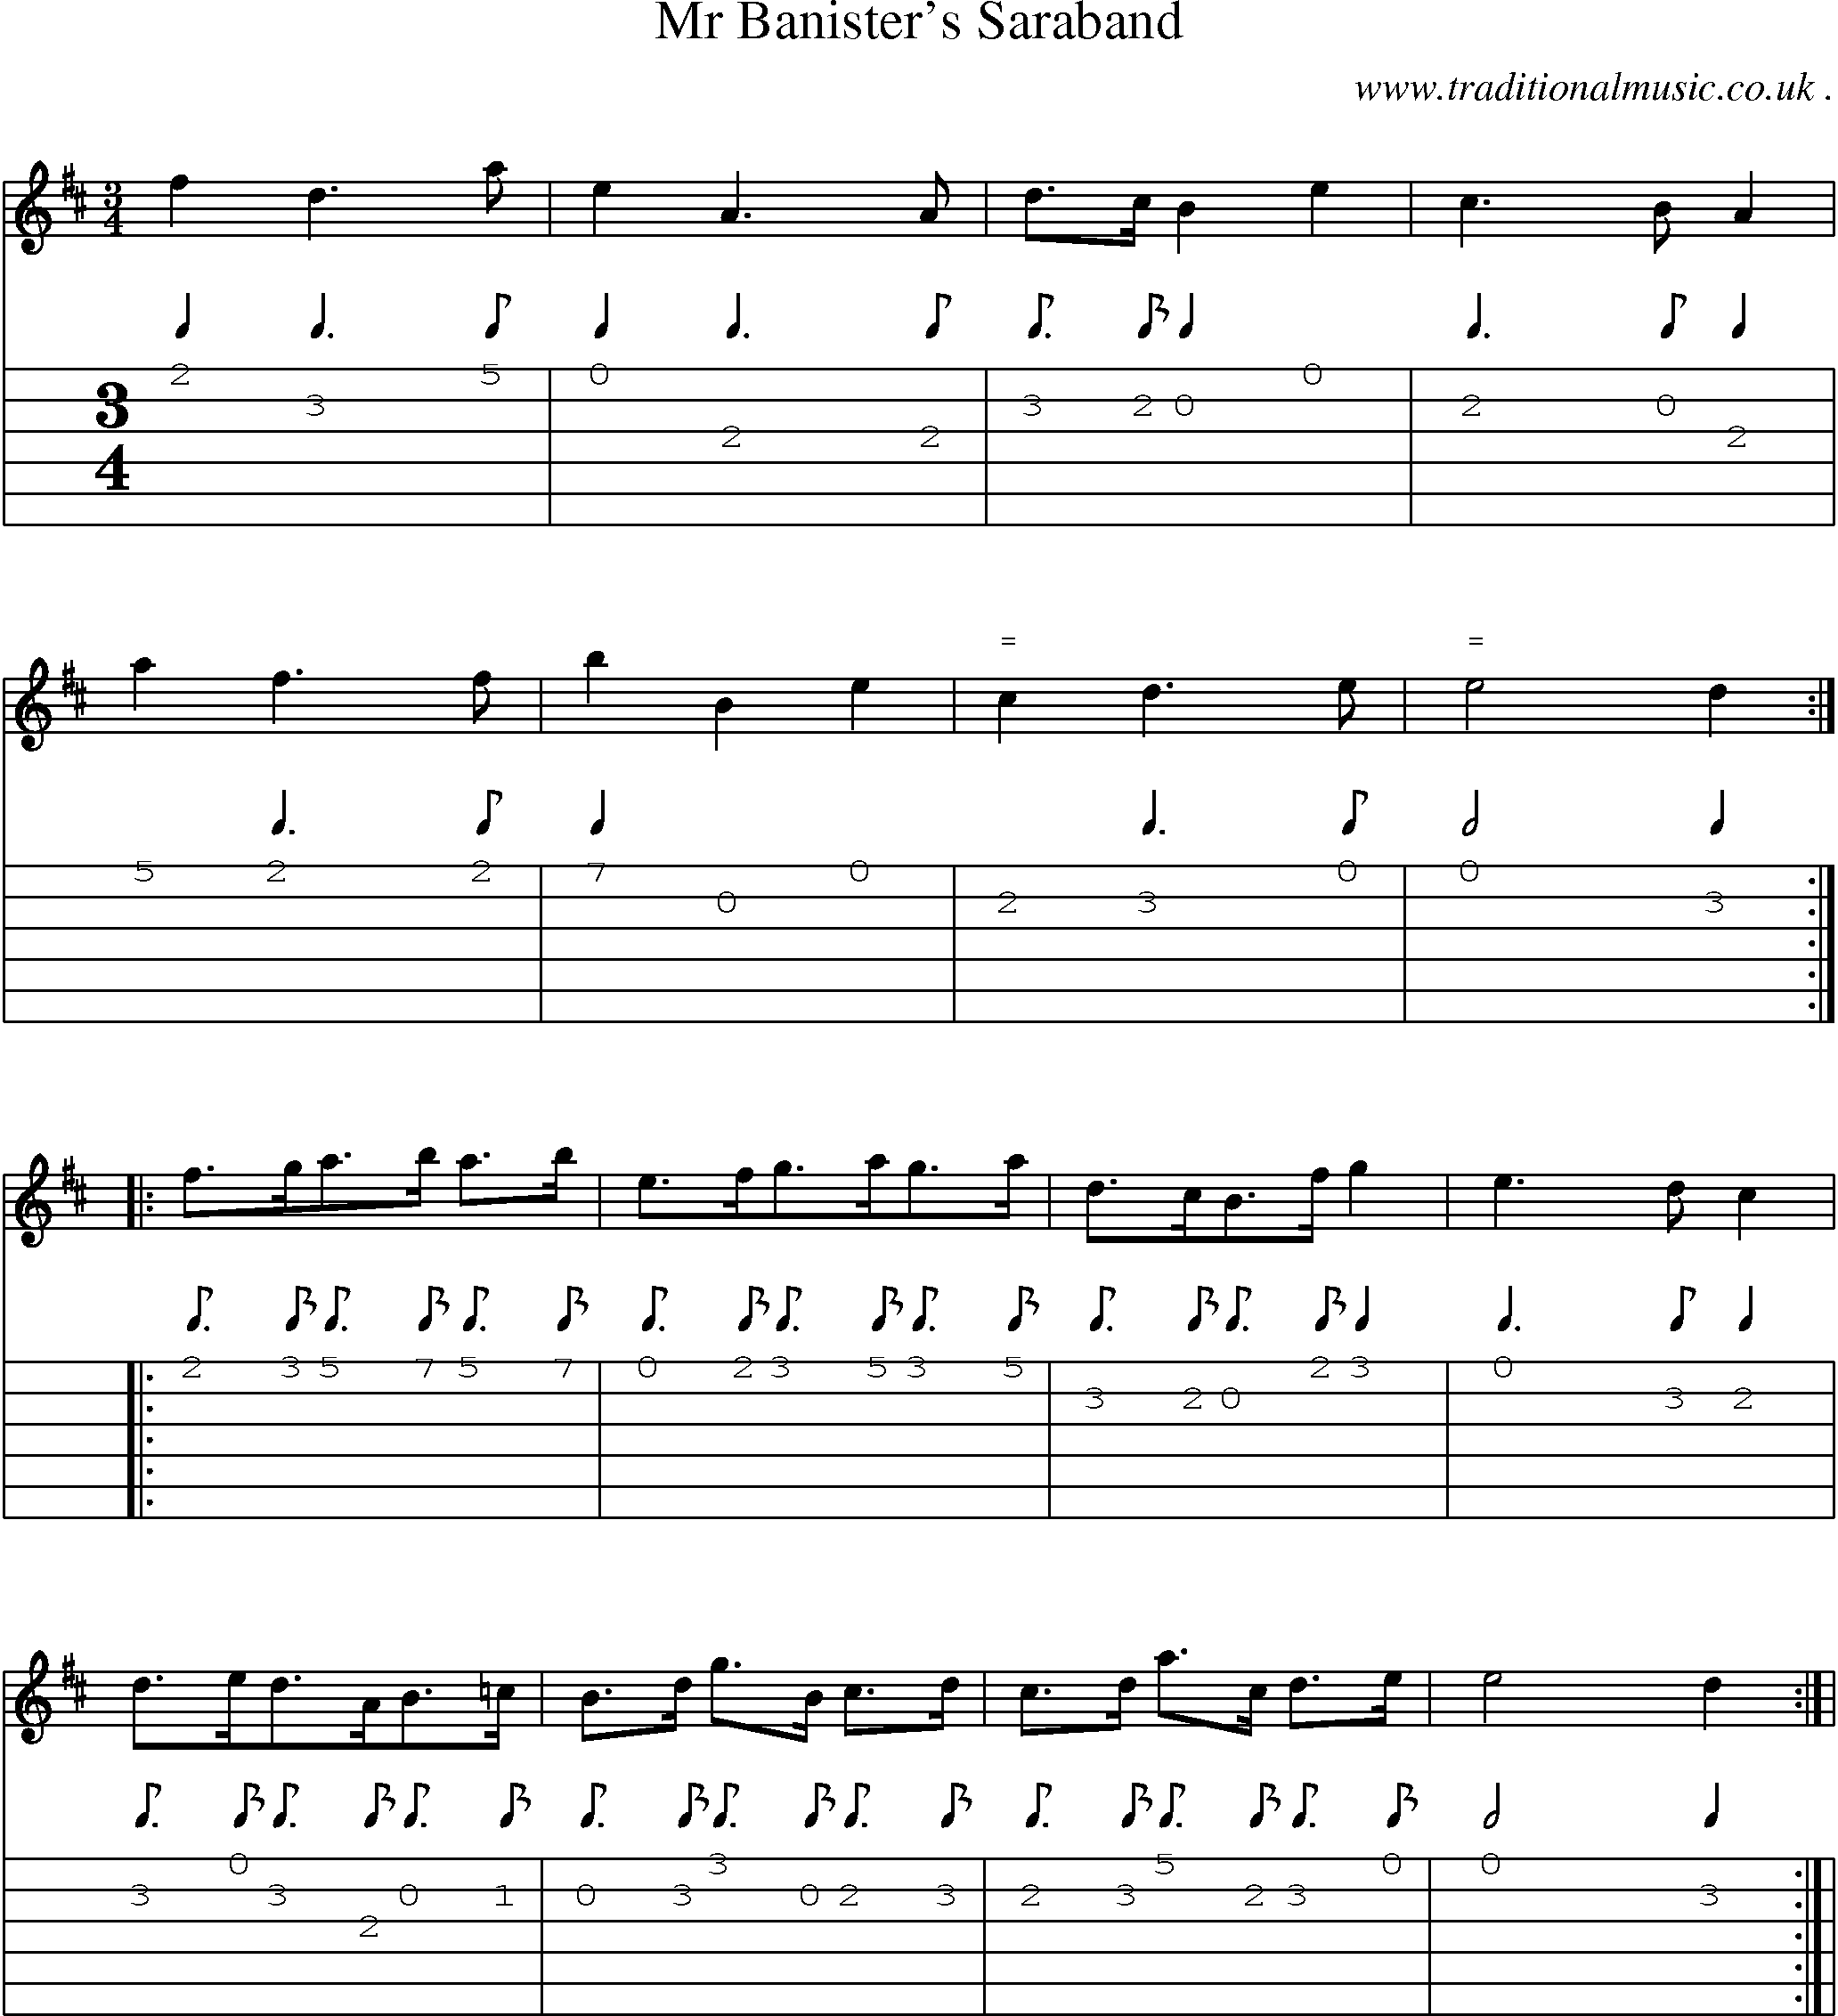 Sheet-Music and Guitar Tabs for Mr Banisters Saraband